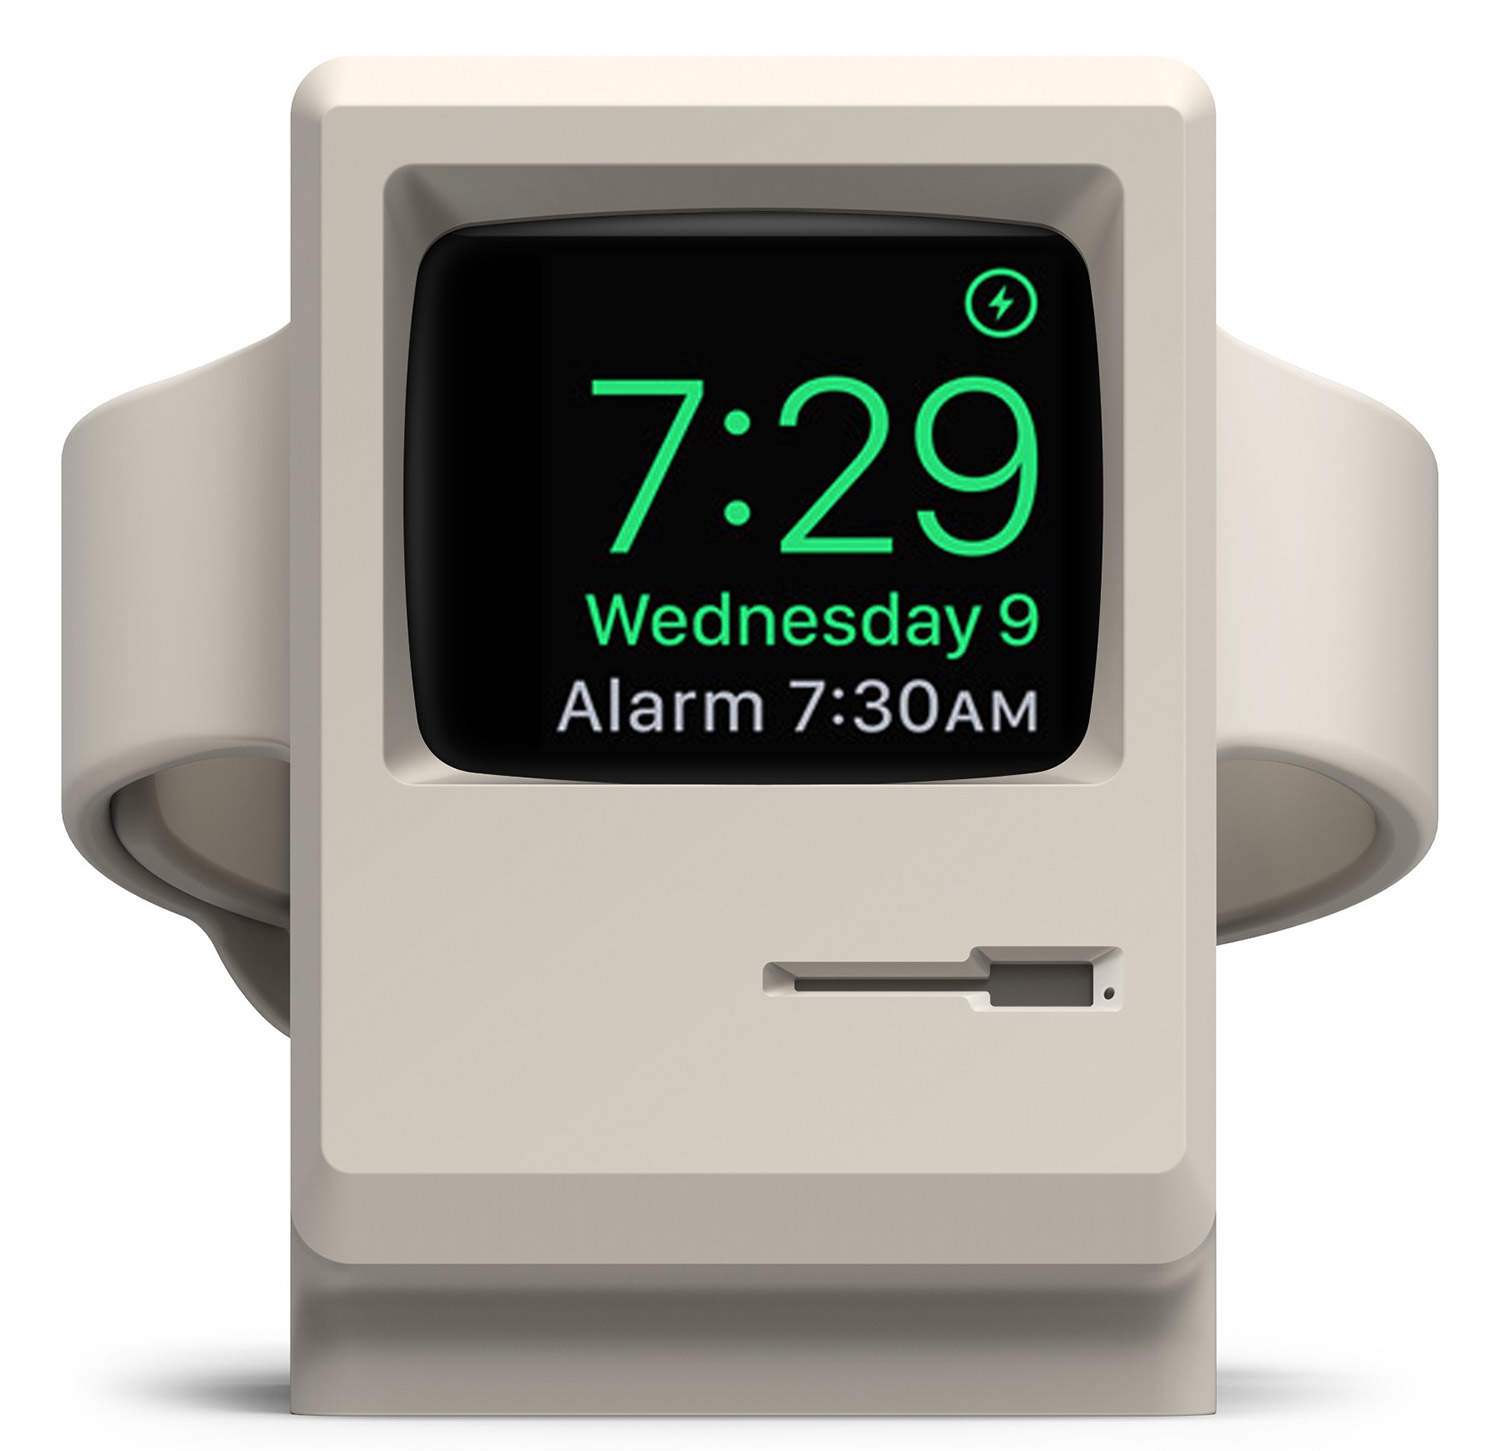 This stand from elago will charge your Apple Watch in a time warp.